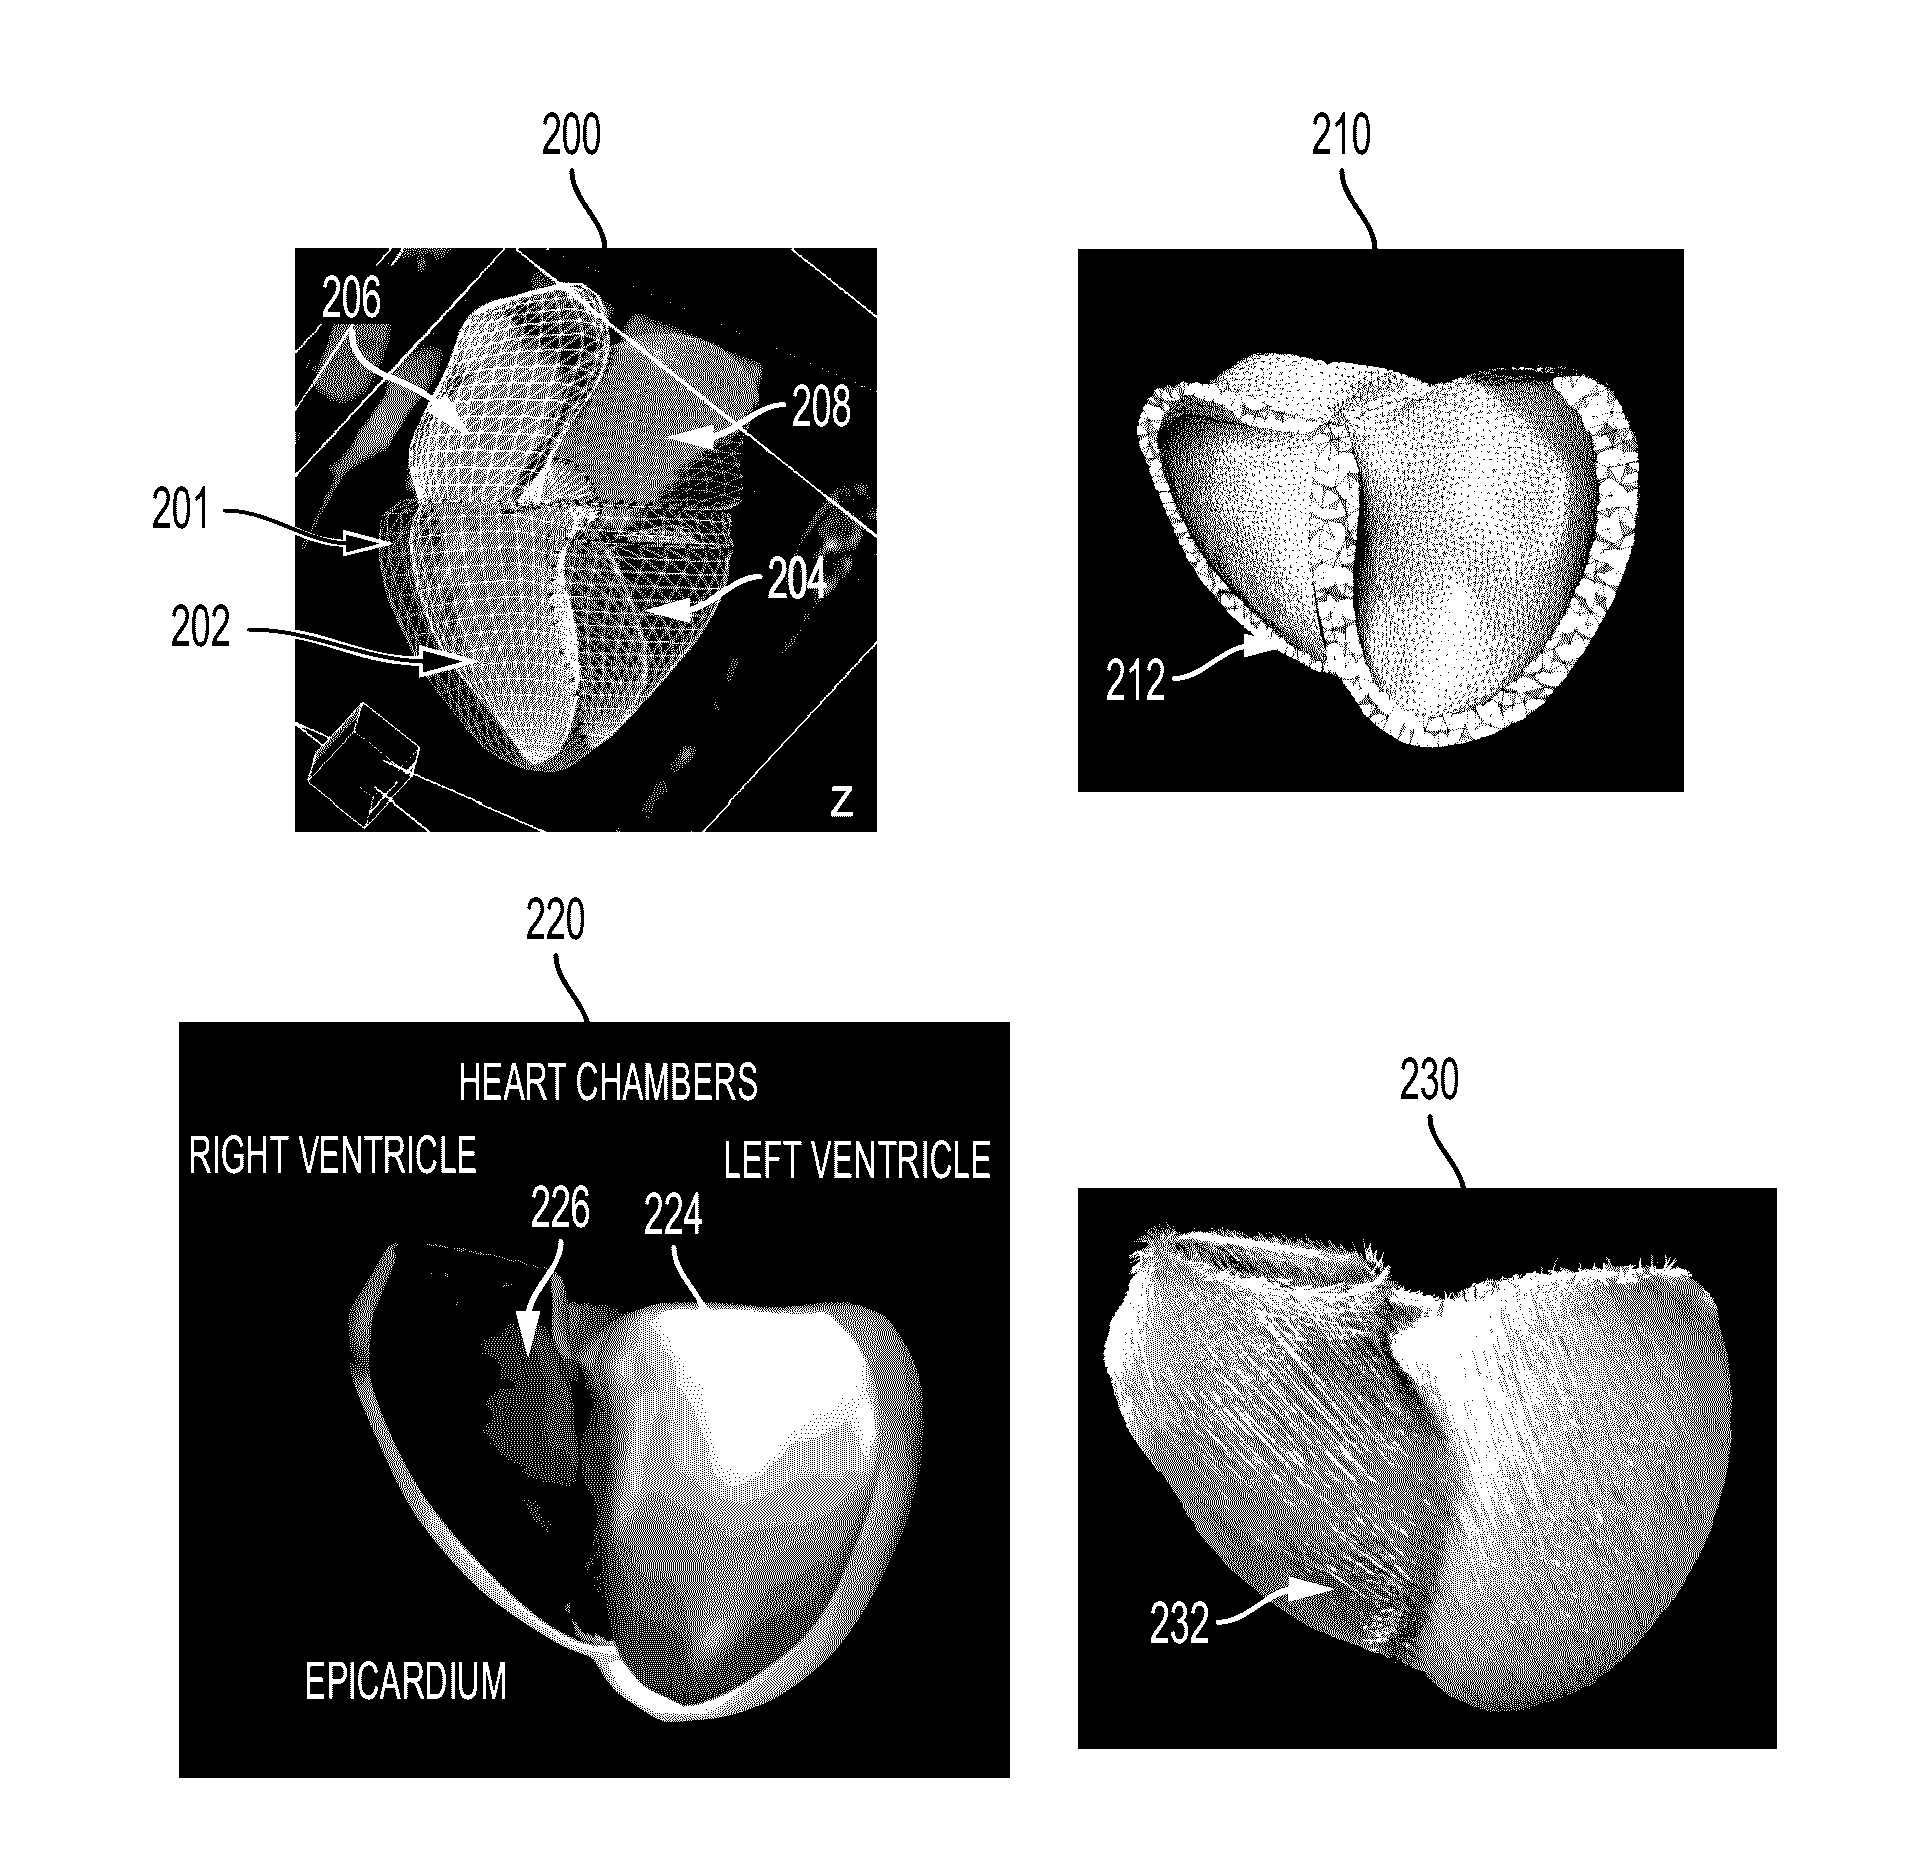 System and Method for Non-Invasively Estimating Electrophysiological Maps and Measurements from Cardio-Thoracic 3D Images and Electrocardiography Data